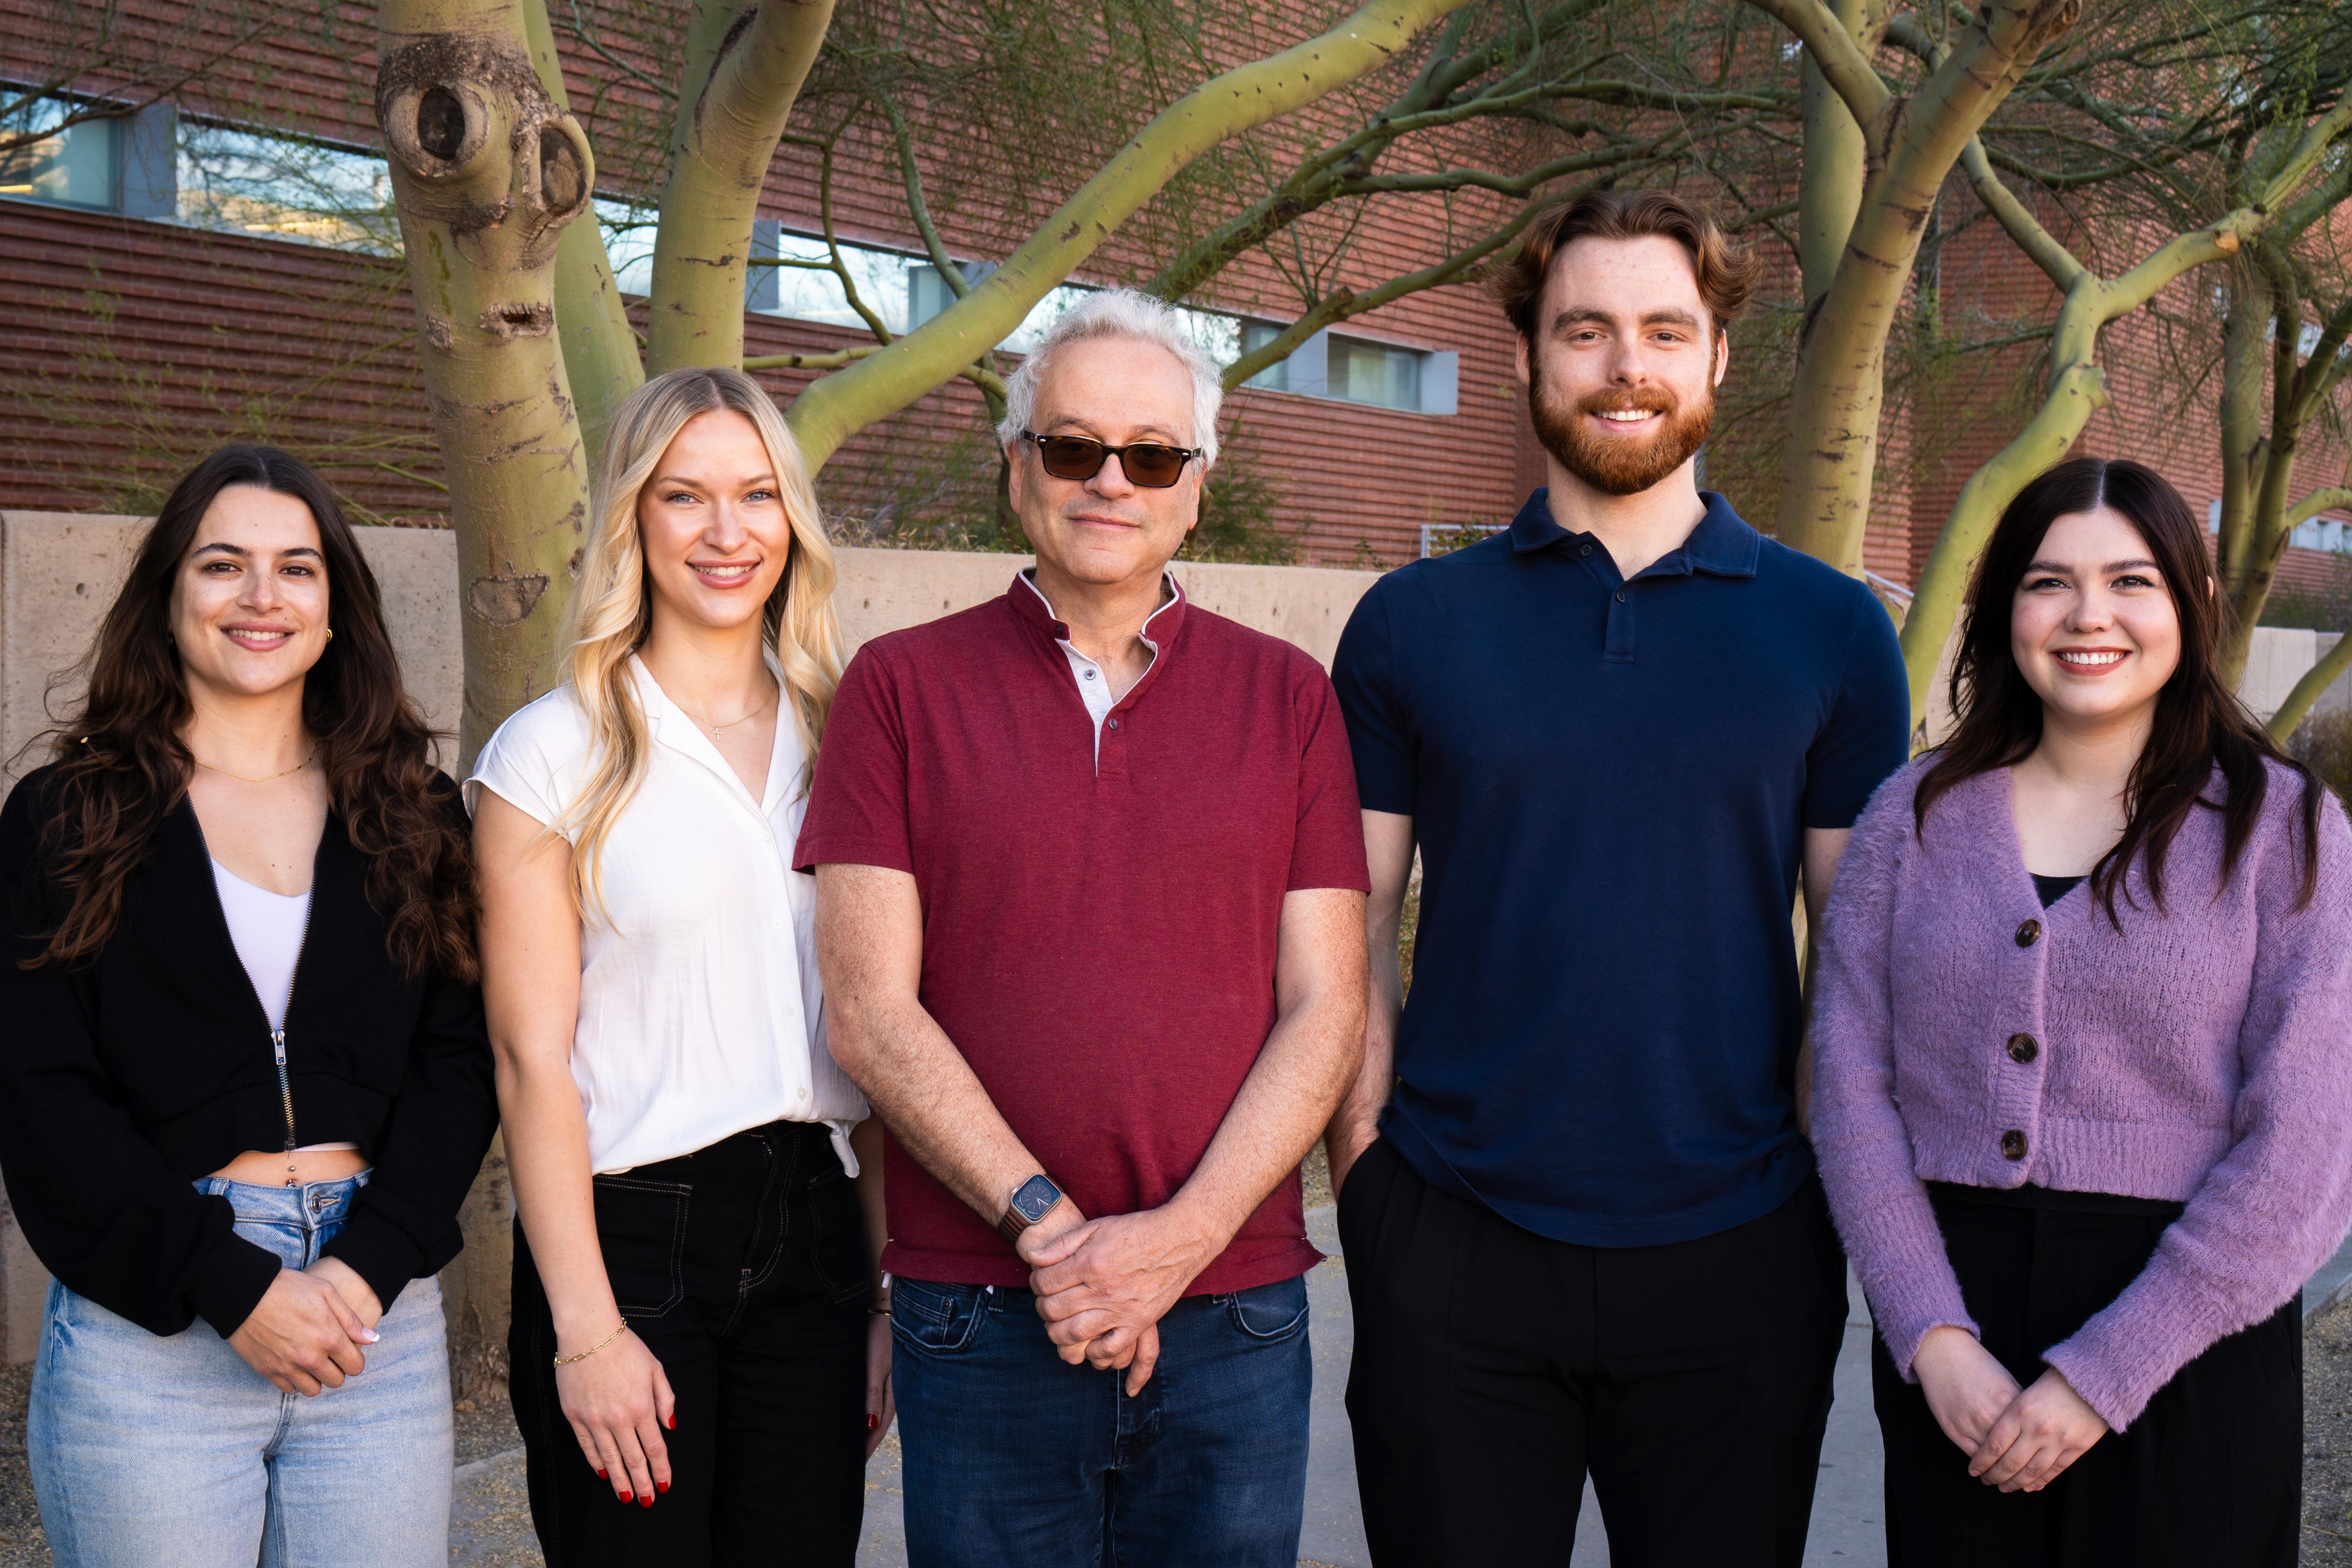 Members of Dr. Laboratory in Affective Neuroscience and Epigenetics pose for a photo.